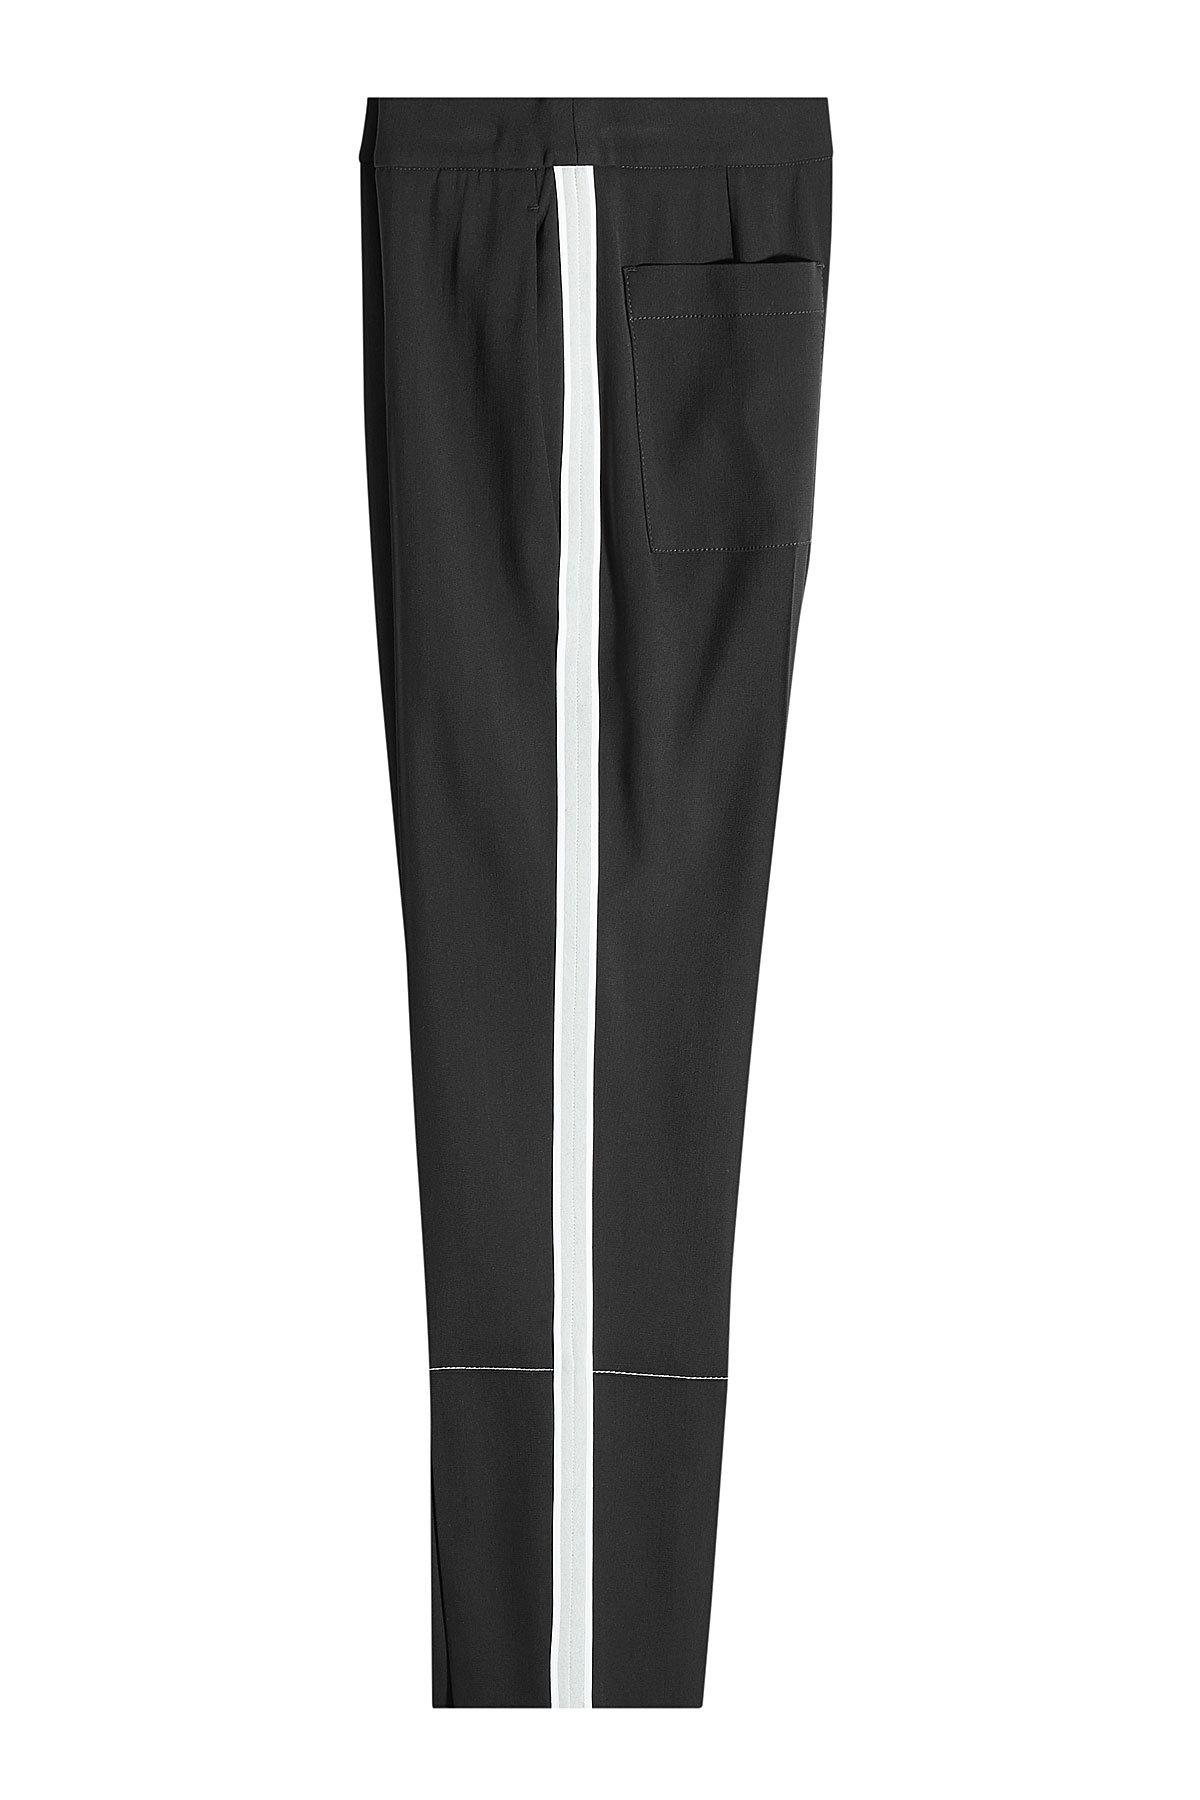 Proenza Schouler Cropped Carrot Pants With Wool In Black | ModeSens